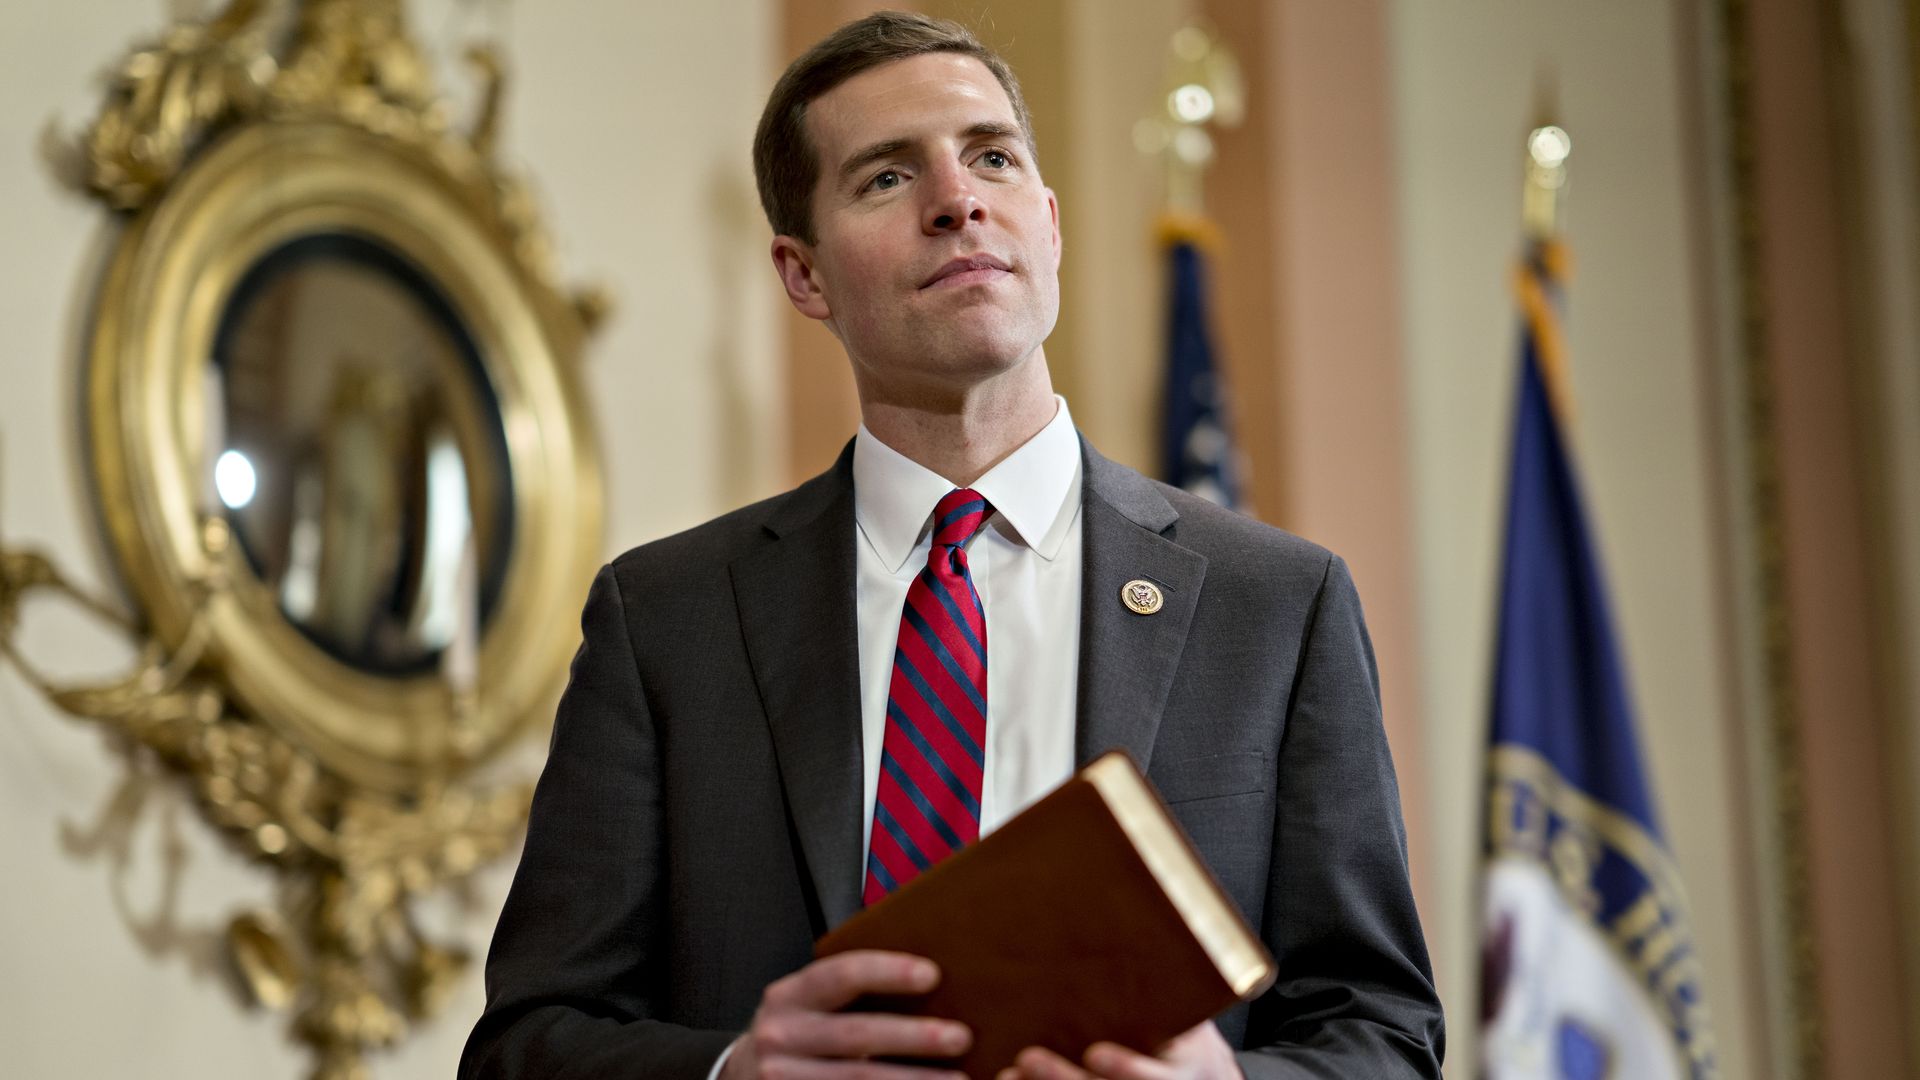 Rep. Conor Lamb is seen holding a Bible after being sworn in.